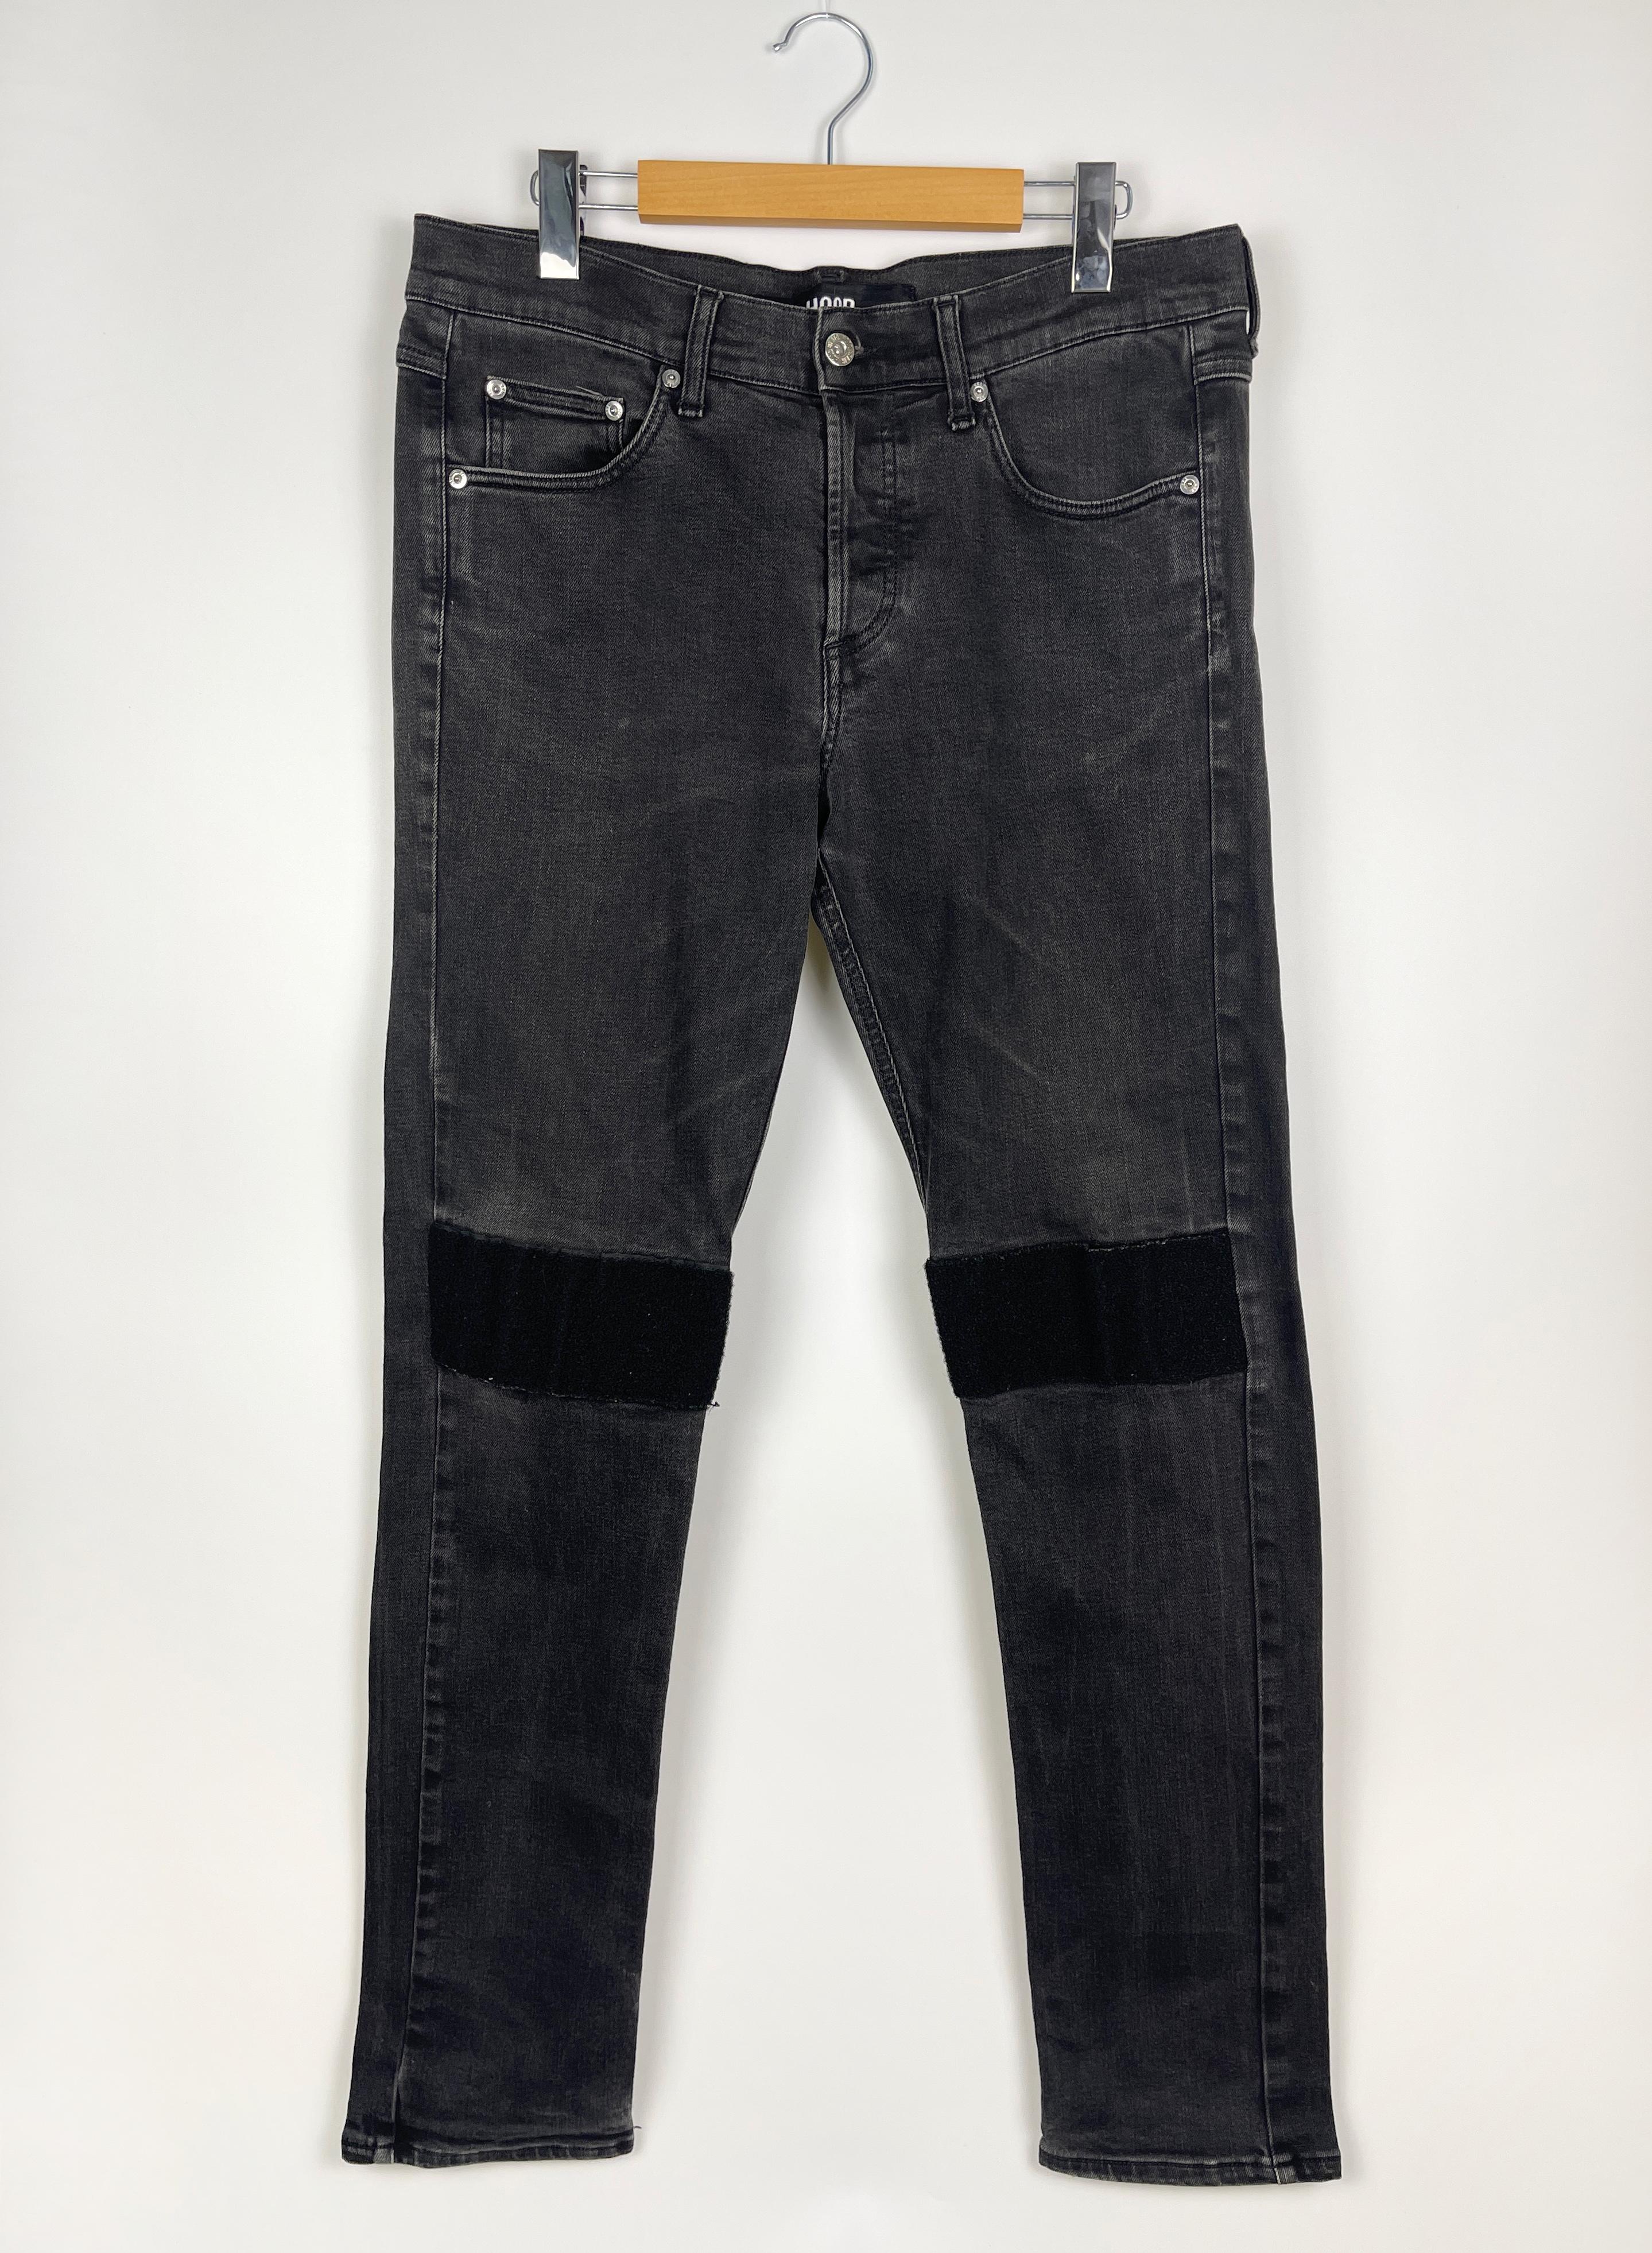 Hood by Air Denim Zip Pants w/ Patch For Sale 4